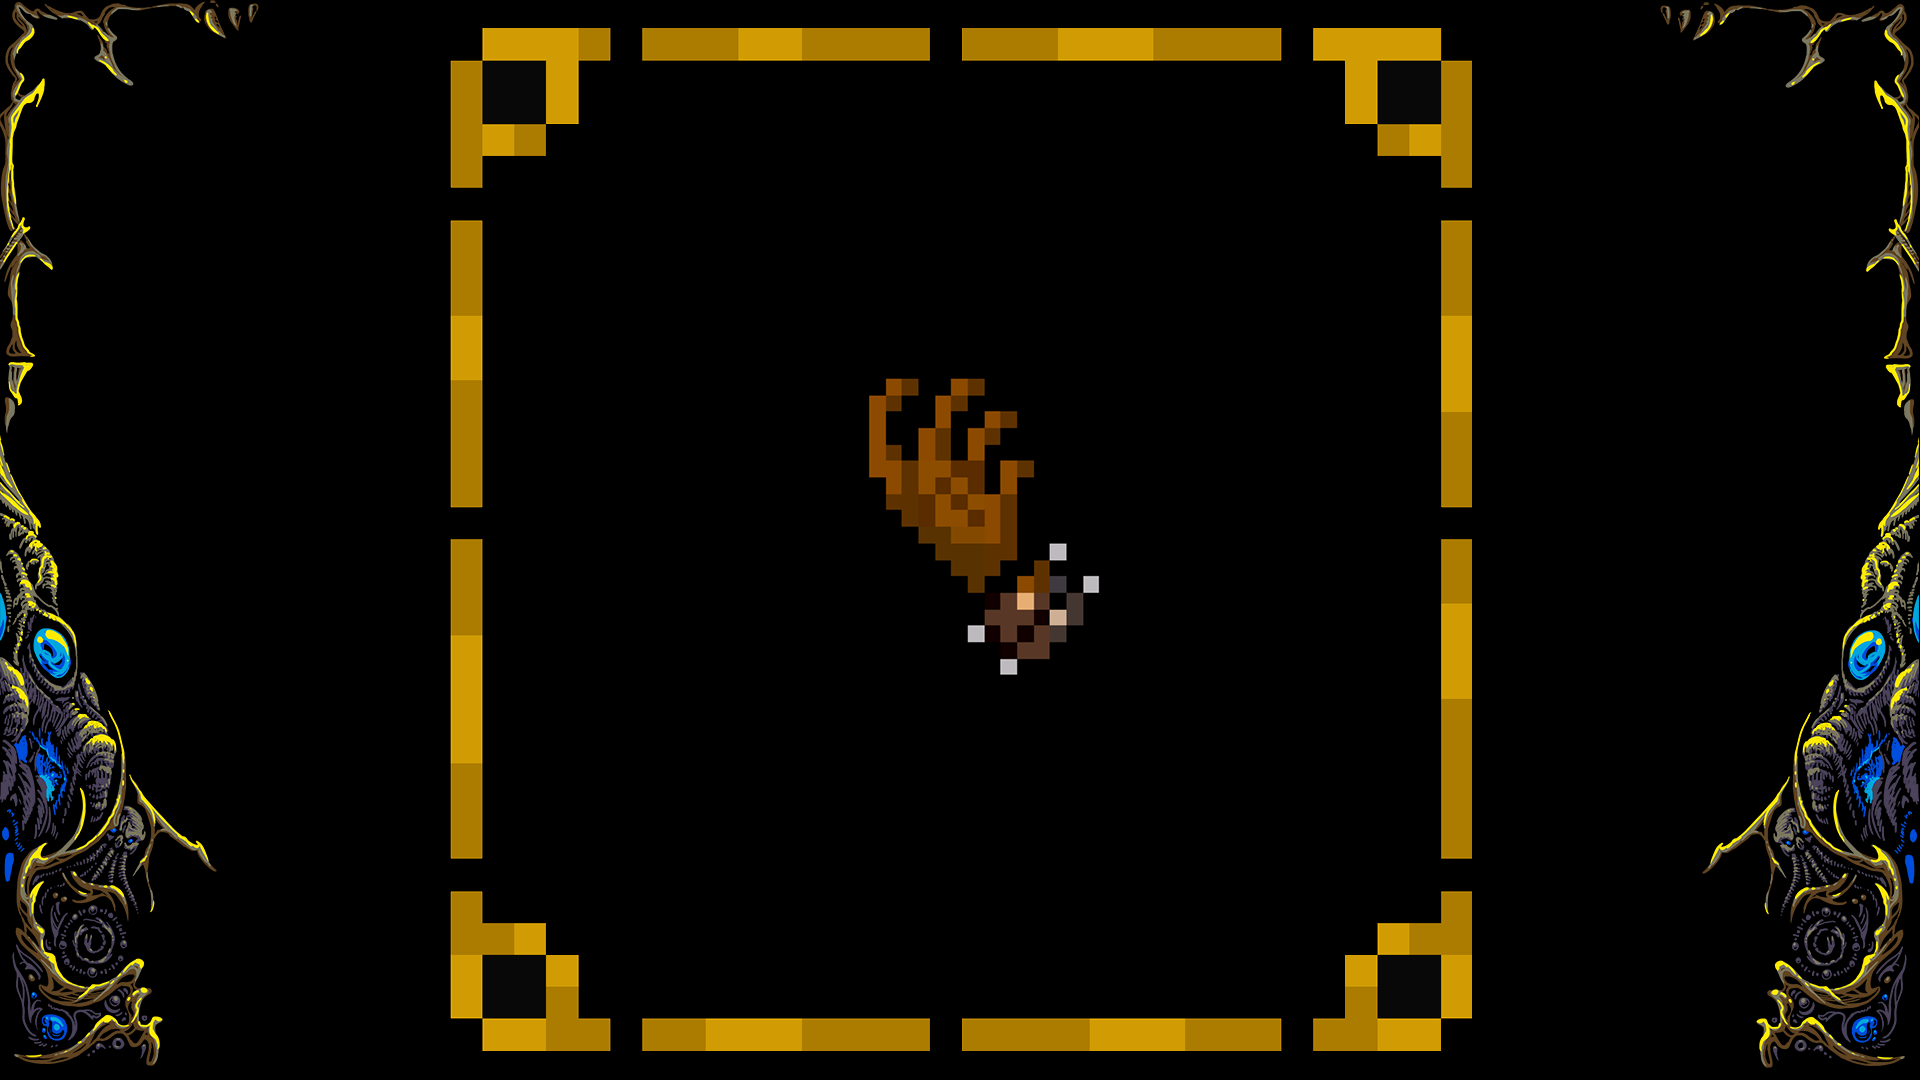 Icon for Gloves